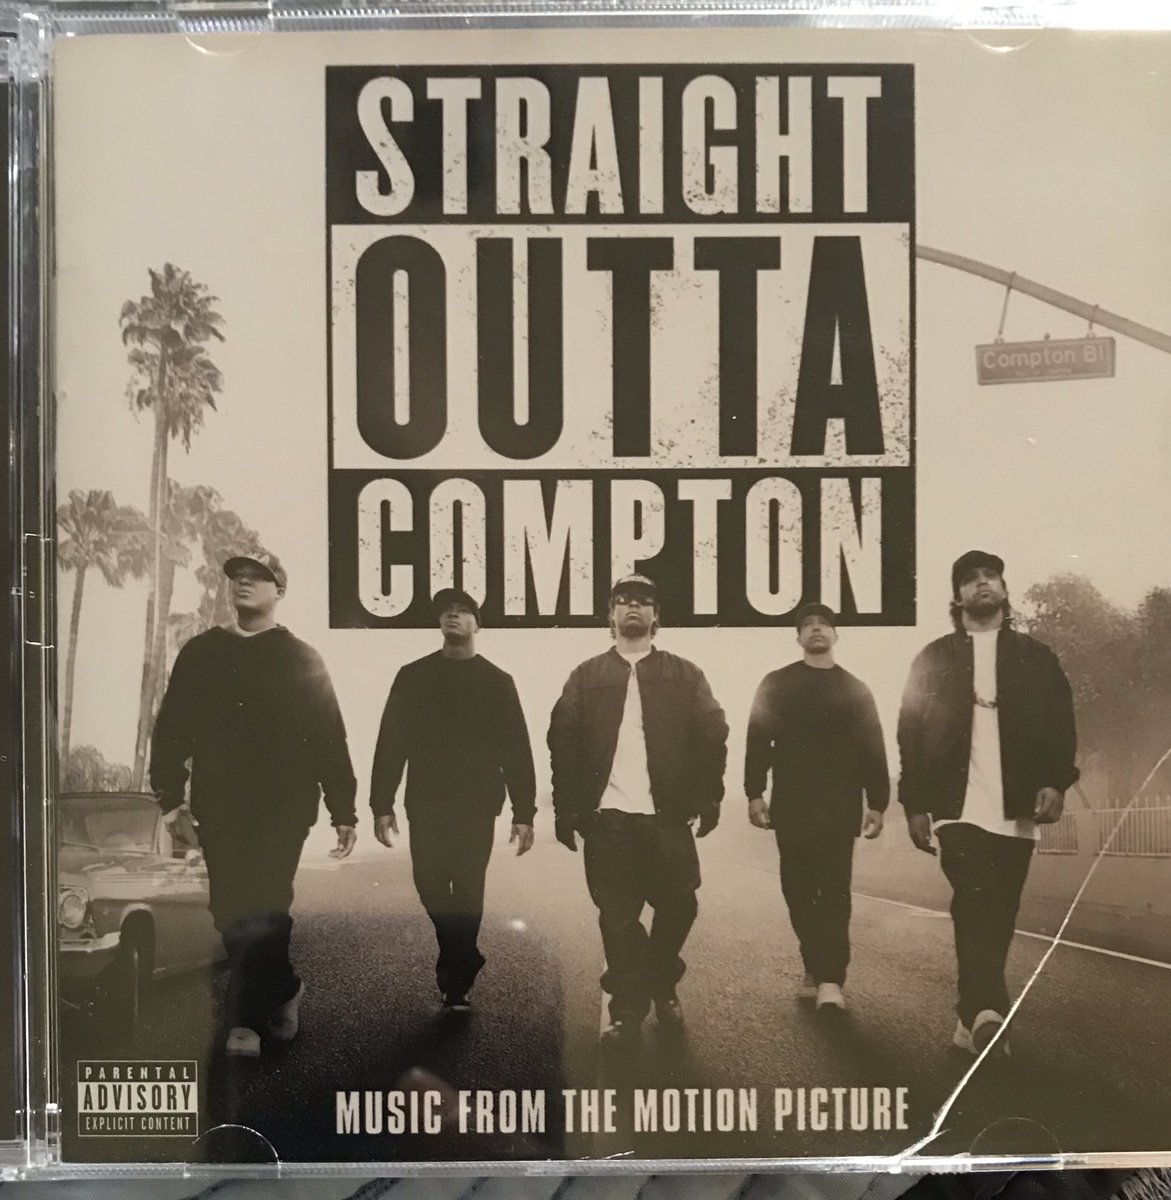 #10: Straight Outta Compton- Music from the Motion Picture. It’s a little tore up but that’s because my dad and I wore it out when it came out. (We have the original downstairs with the other CDs in our collection).